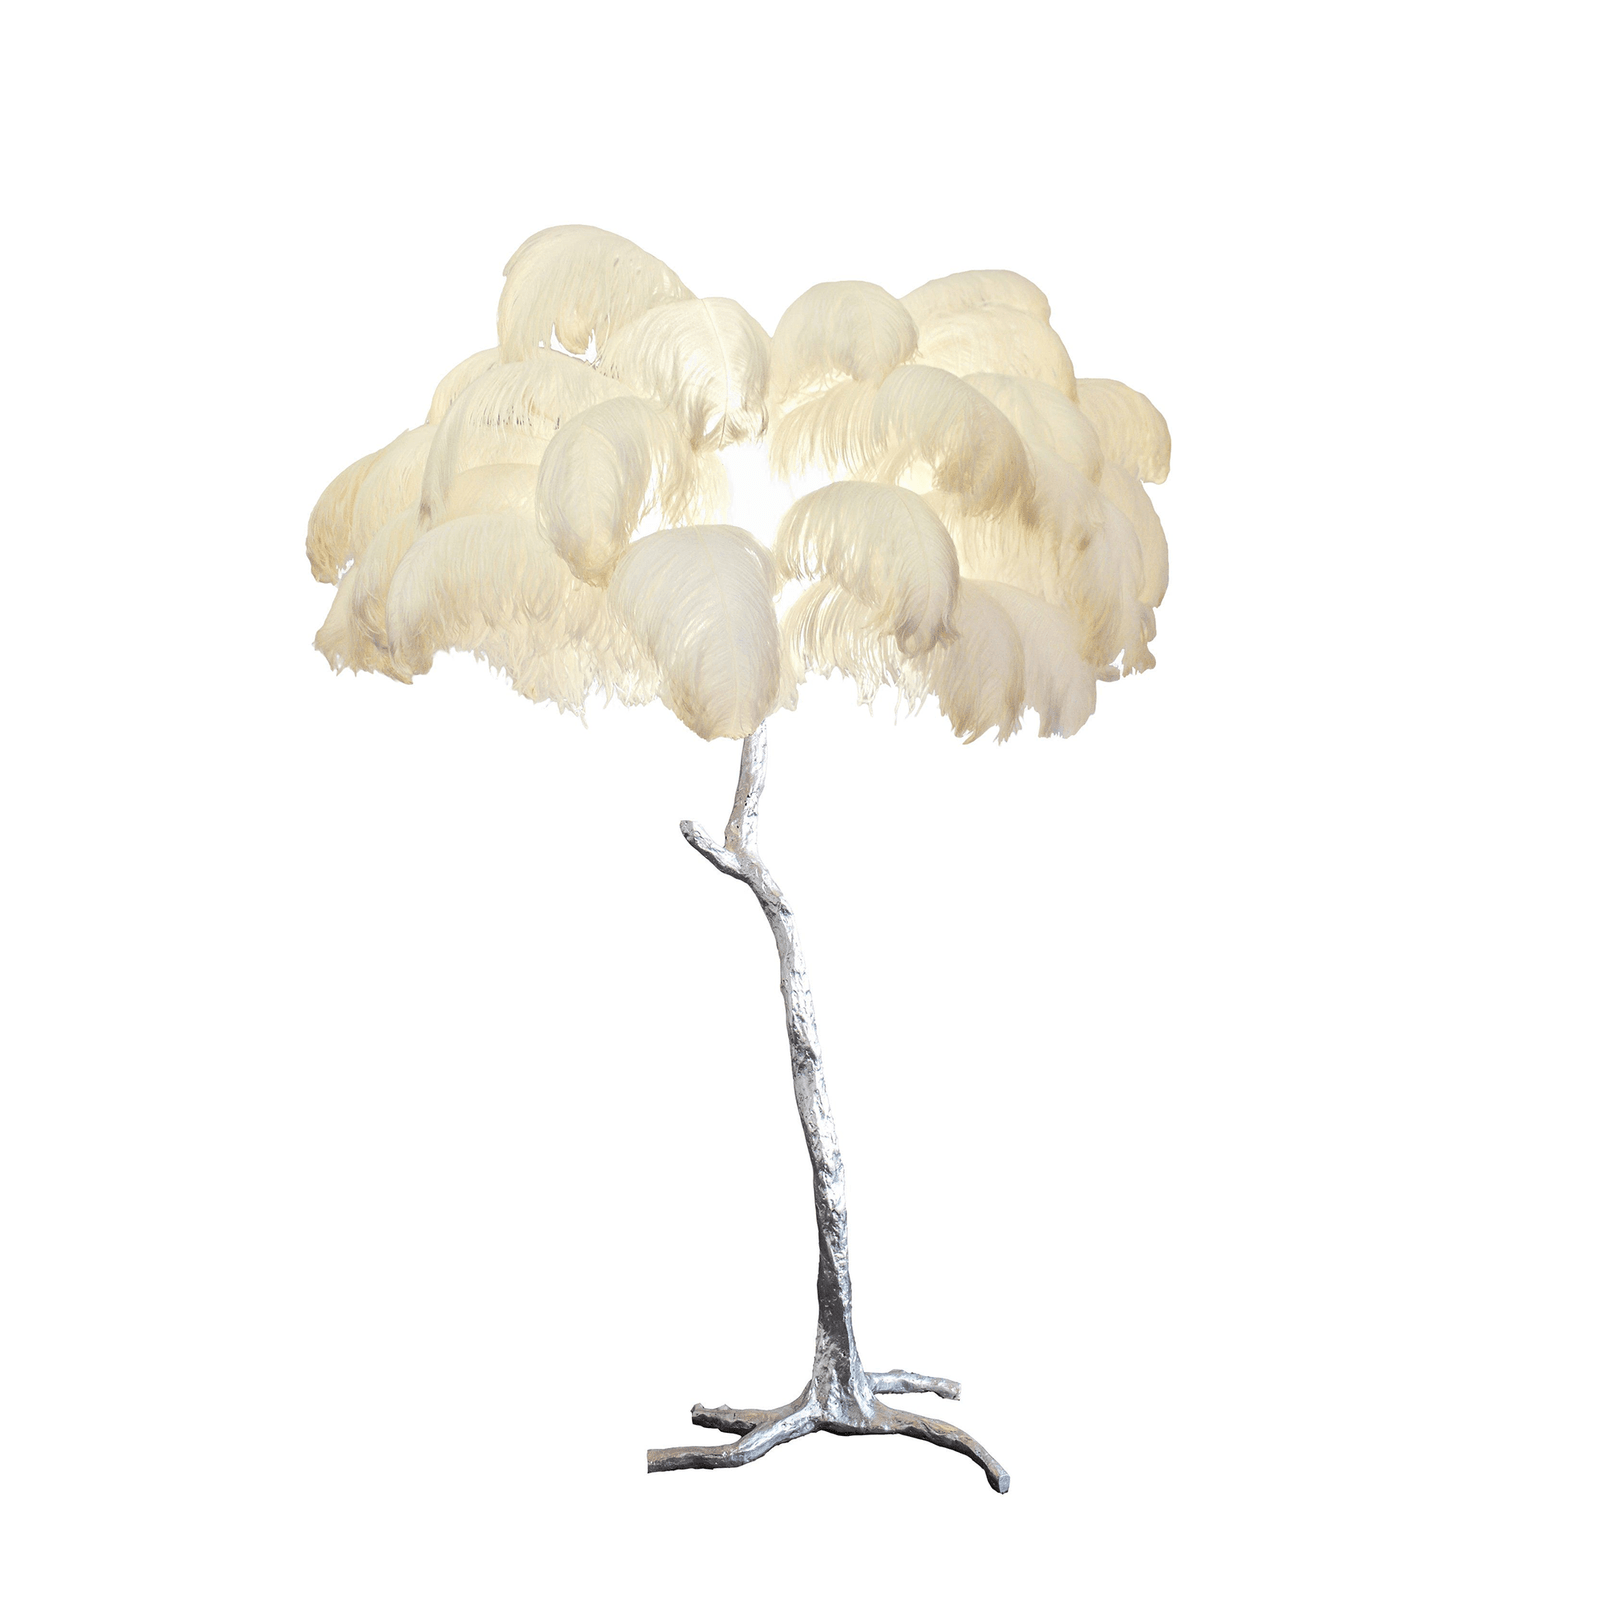 Silver Brass Floor Lamp with Ostrich Feather Ornamentation, measuring 39.4 inches in diameter and 63 inches in height (or, alternatively, 100cm in diameter and 160cm in height).